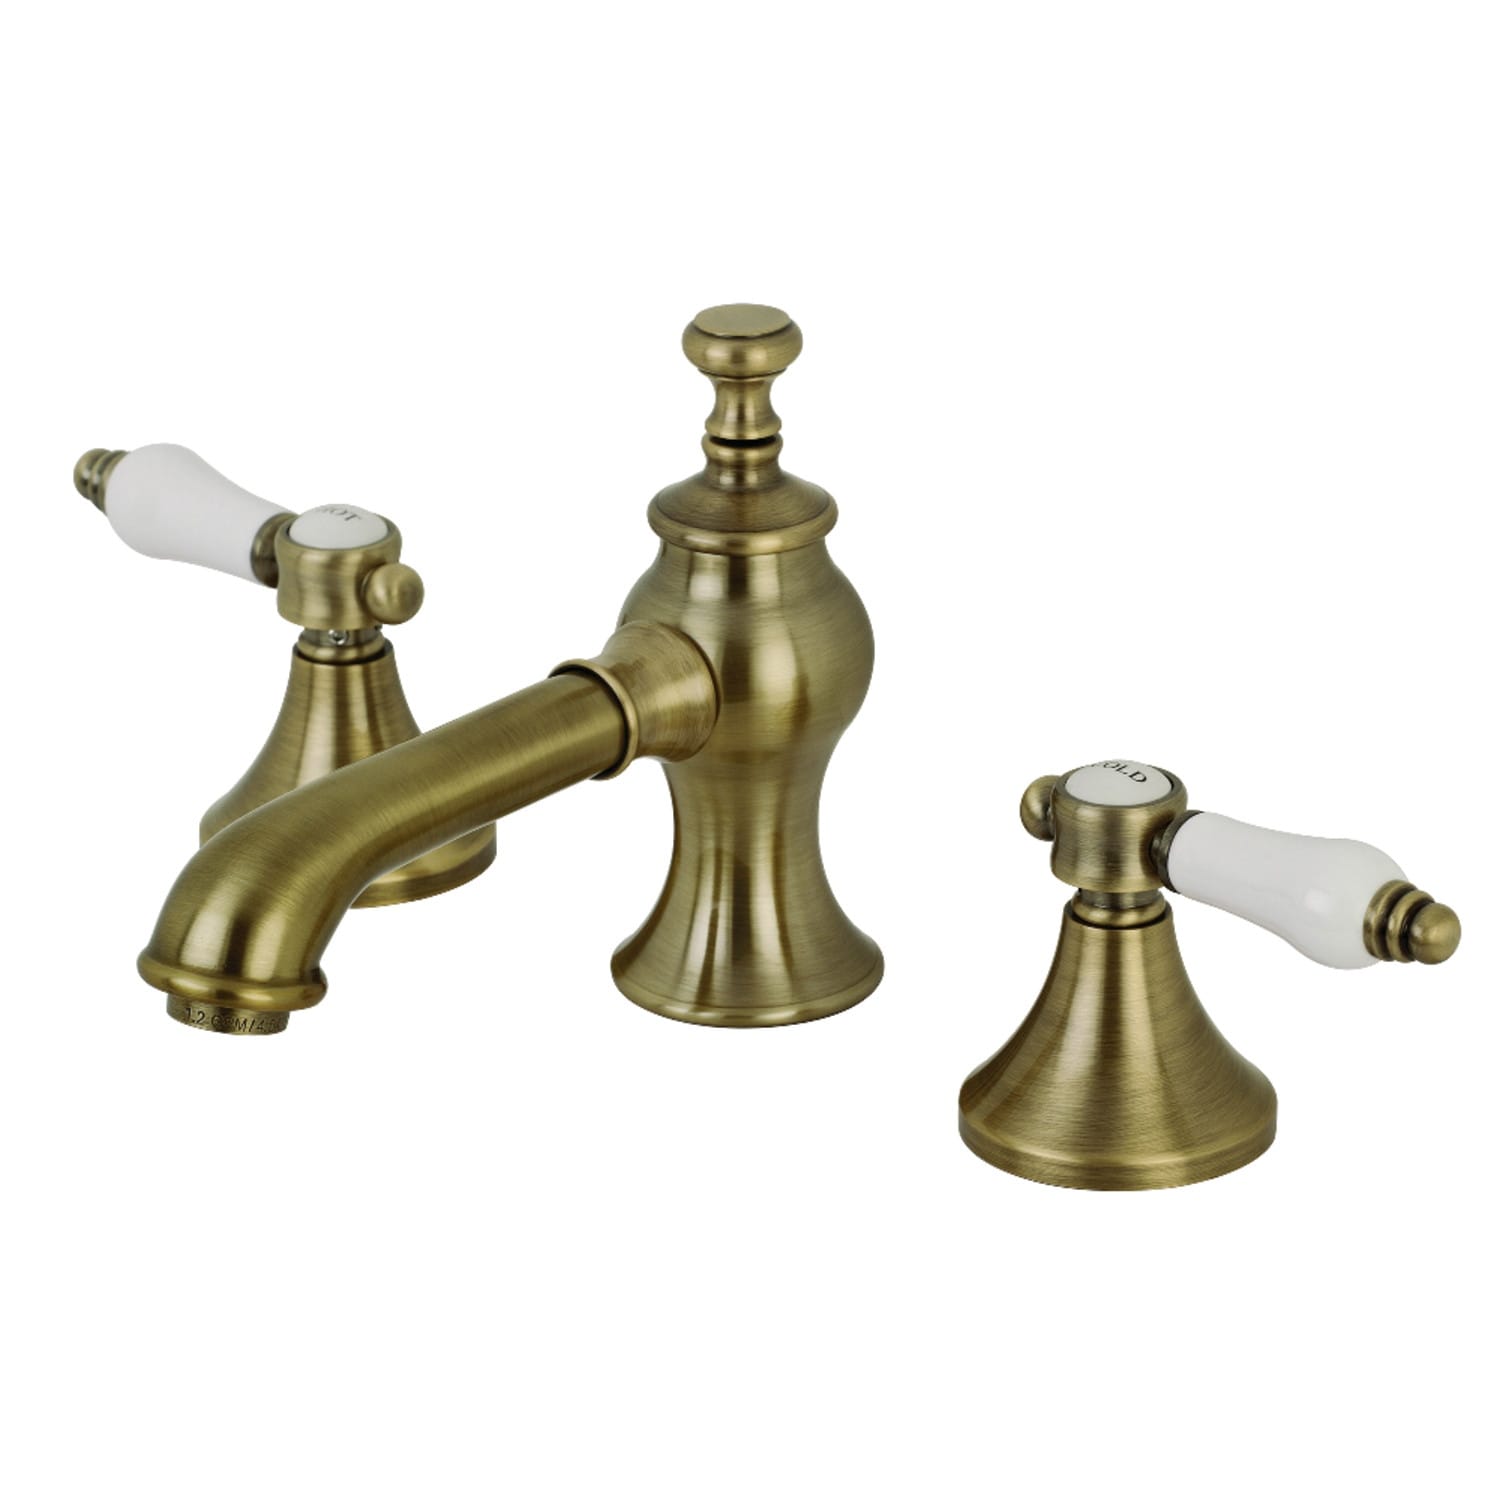 https://ak1.ostkcdn.com/images/products/is/images/direct/304c1f19046c076623810703f0aa9d4dd7aa02fd/Bel-Air-Deck-Mount-Widespread-Bathroom-Faucet-with-Brass-Pop-Up.jpg